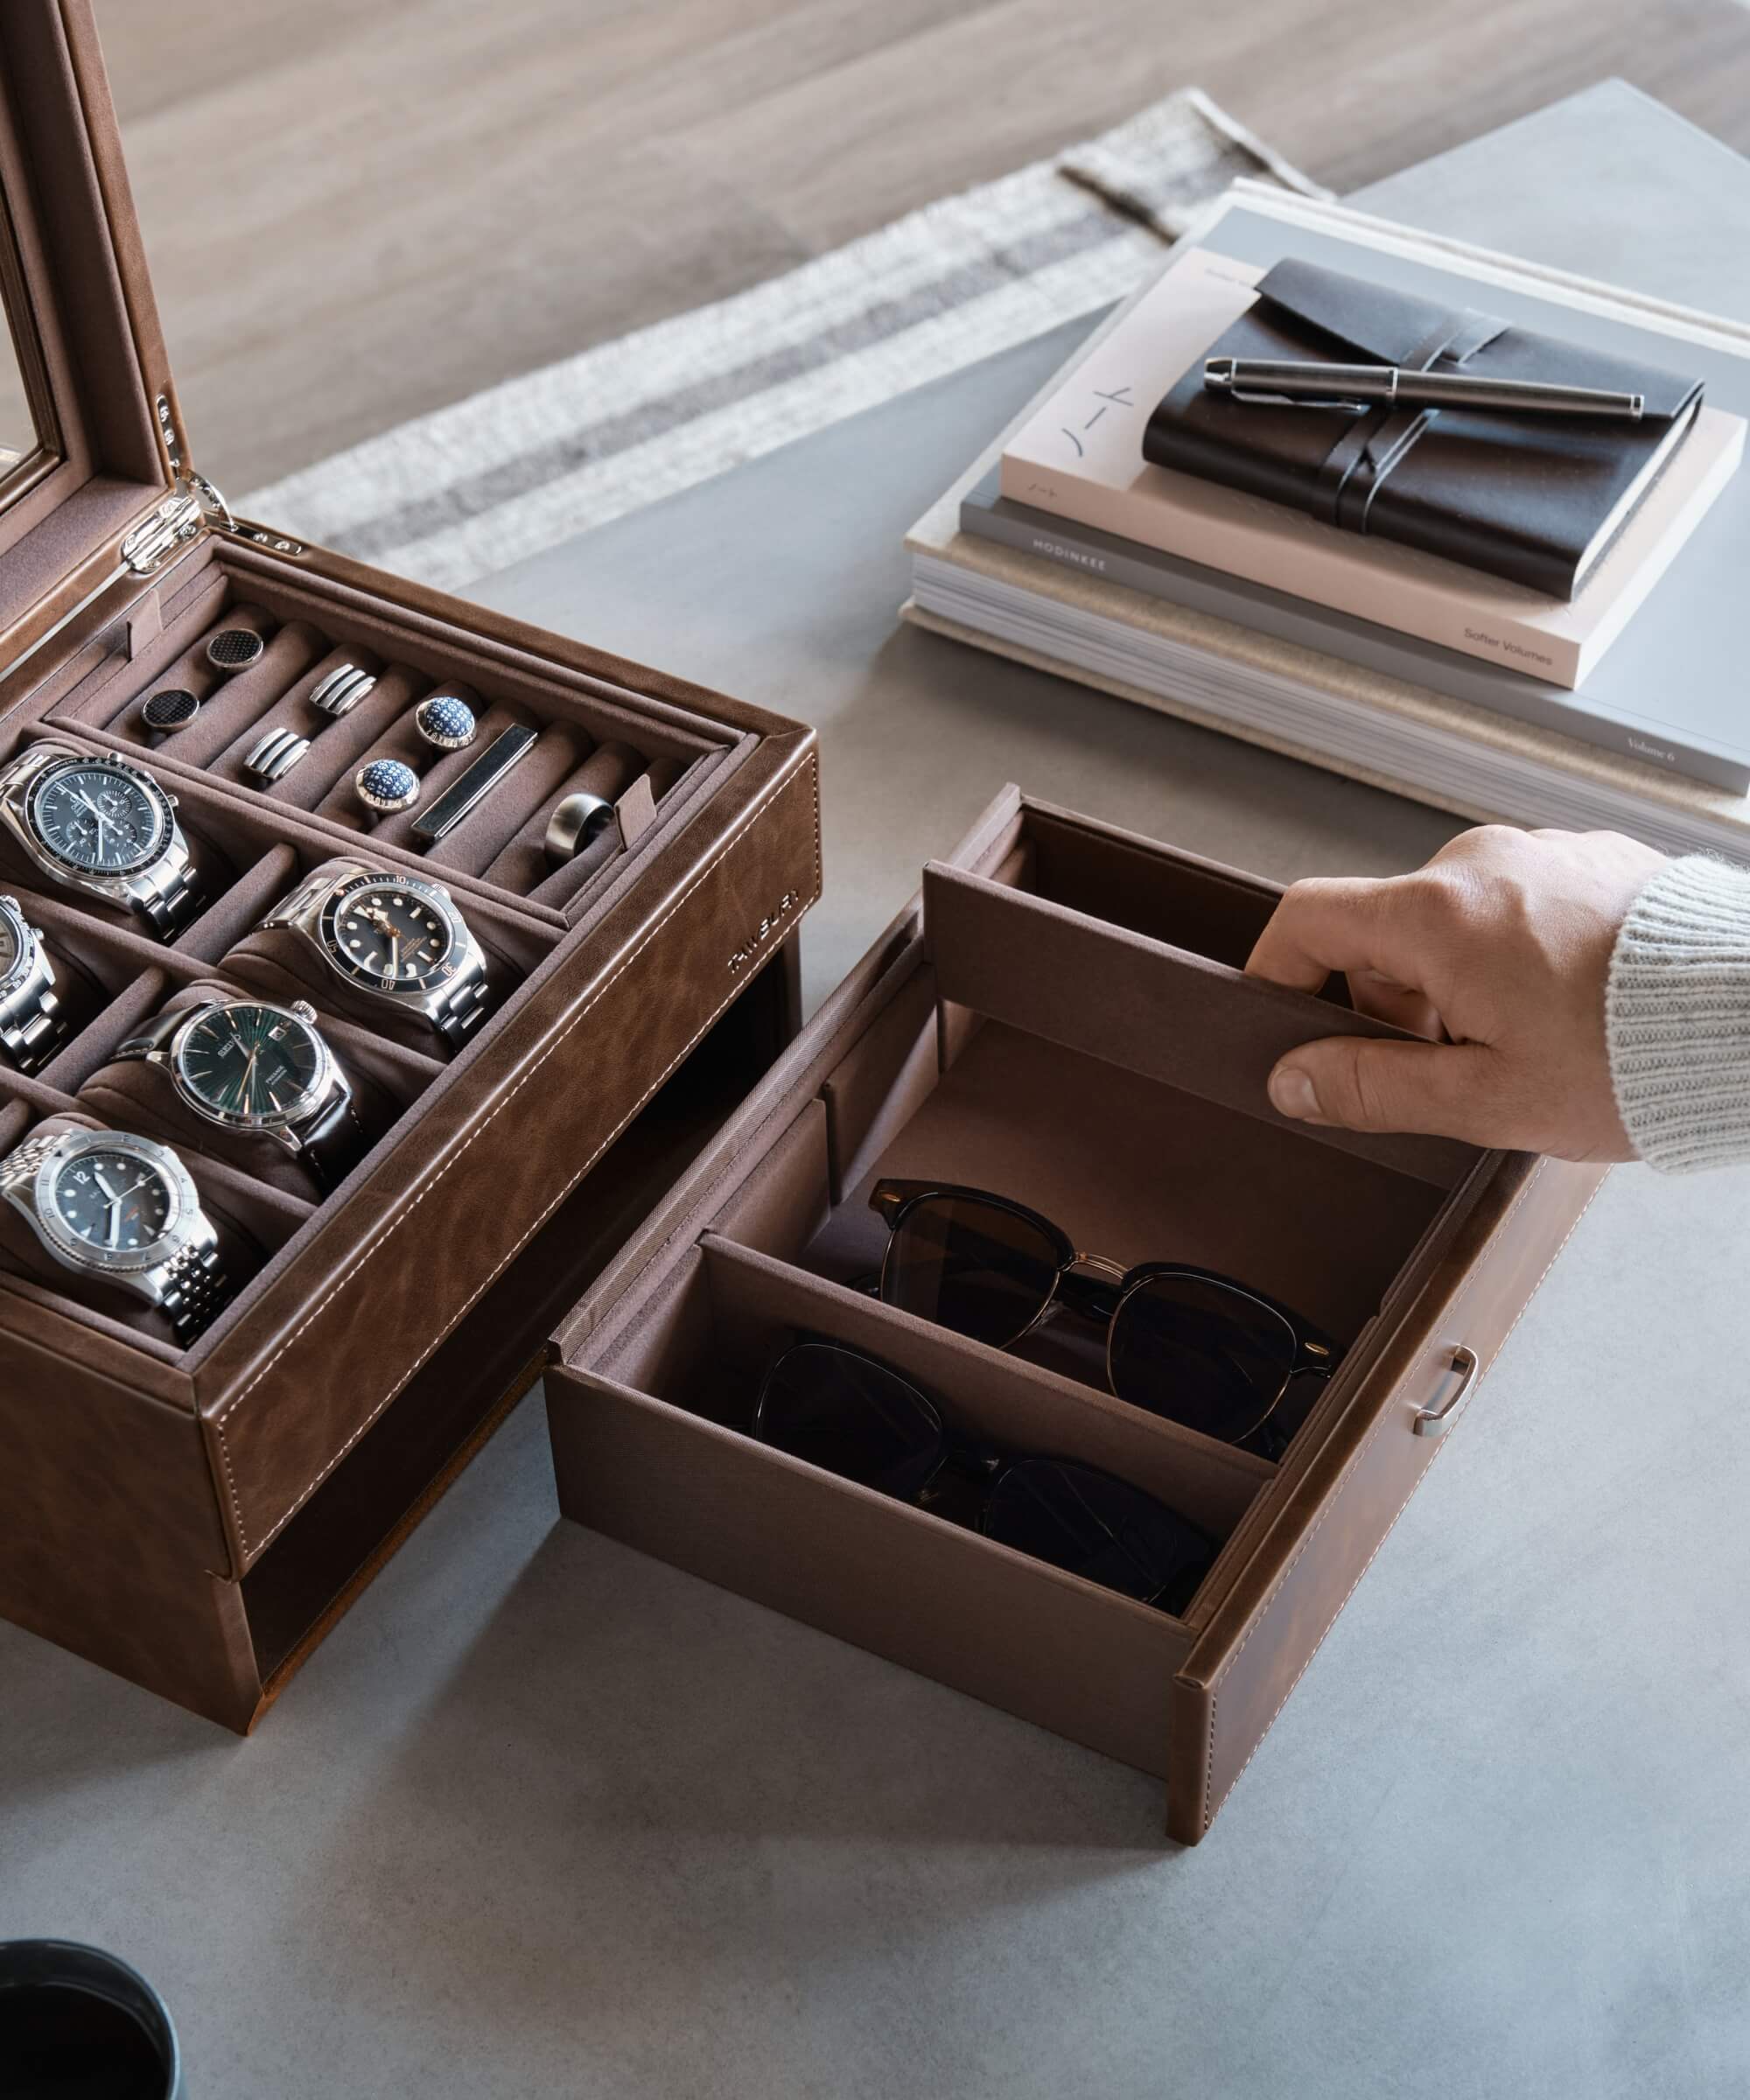 A watch enthusiast is showcasing their TAWBURY Bayswater 6 Watch Jewellery Box - Brown, carefully cradling the timepiece within the elegant wooden box wrapped in luxurious vegan leather.